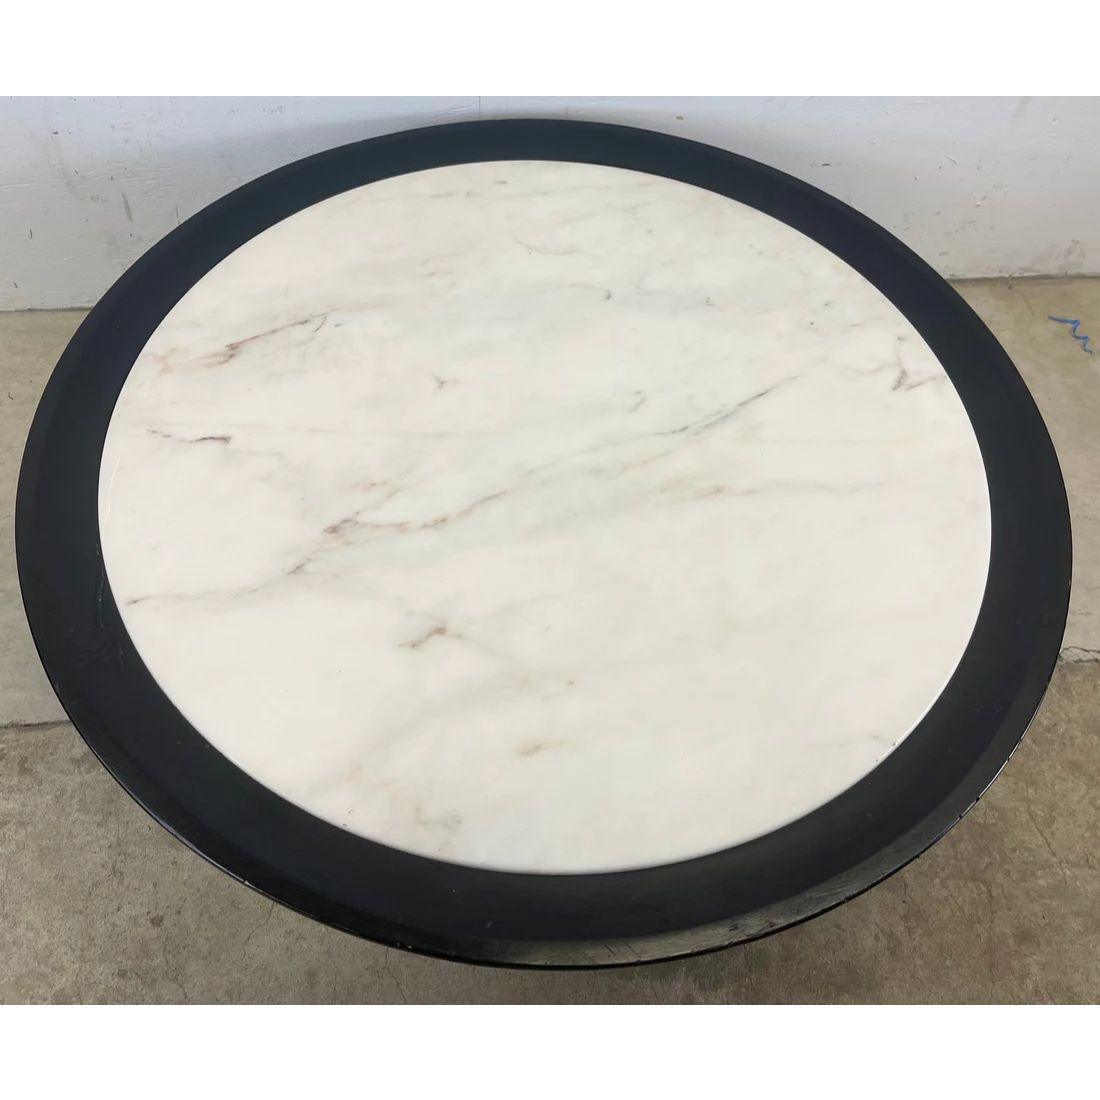 This stylish Mid-Century Modern coffee table features James Mont style. design in a circular design with black lacquer wood frame and marble finish table top. This vintage circle coffee table makes the perfect centerpiece to any seating arrangement.